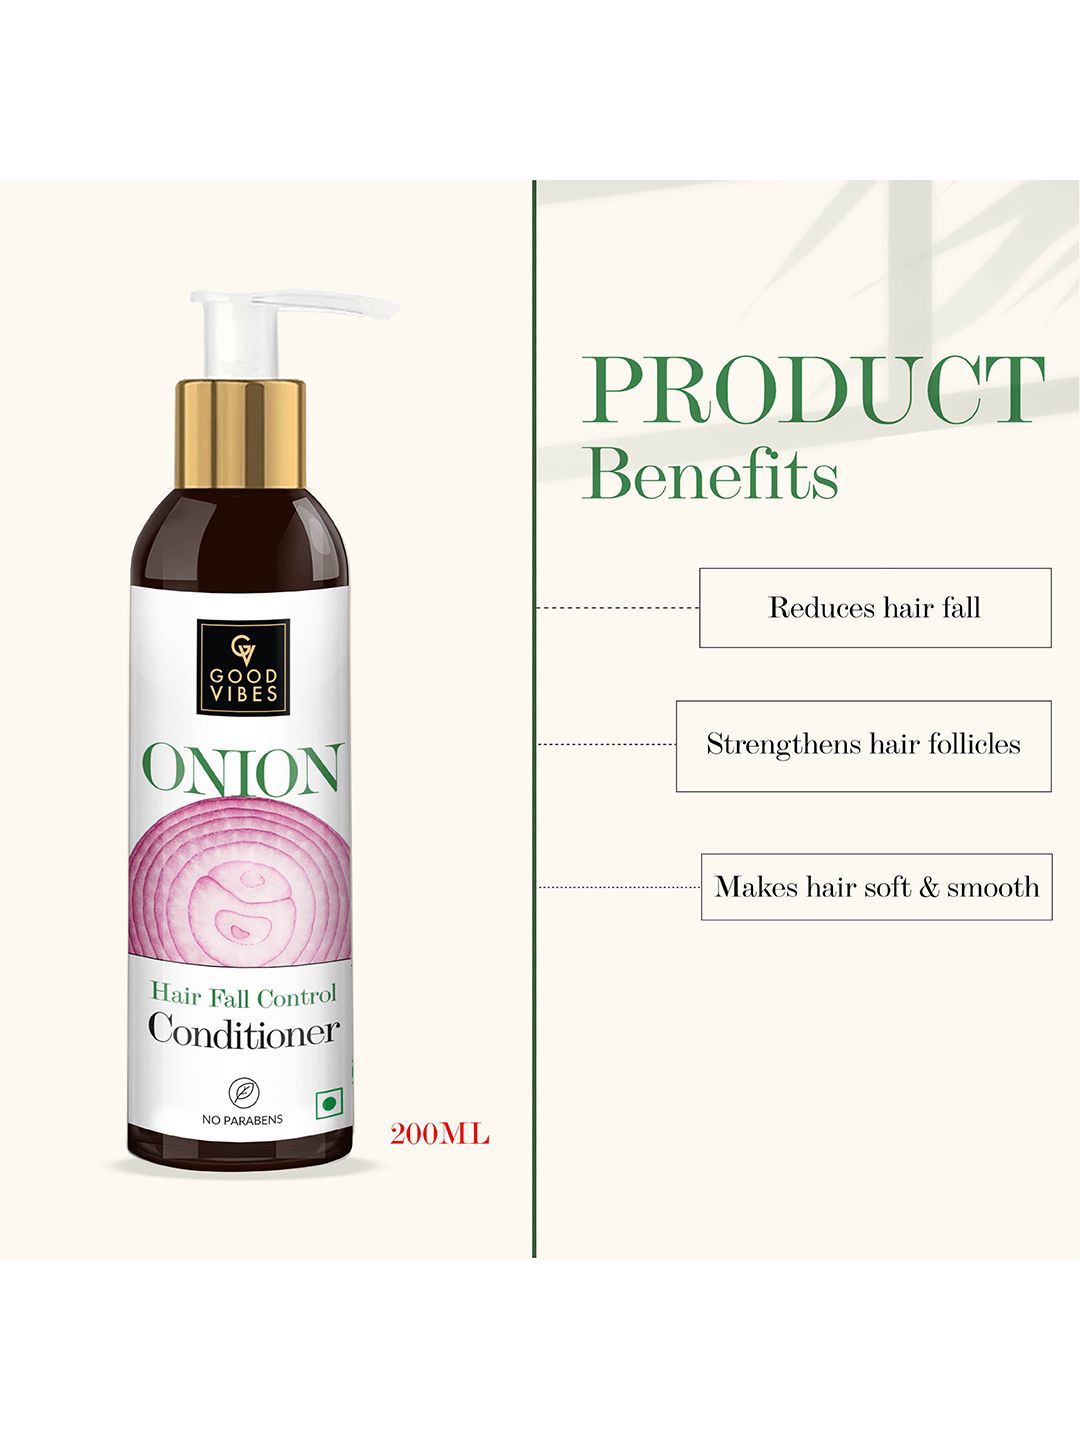 Good Vibes Onion Hair Fall Control Conditioner - 200 ml Price in India